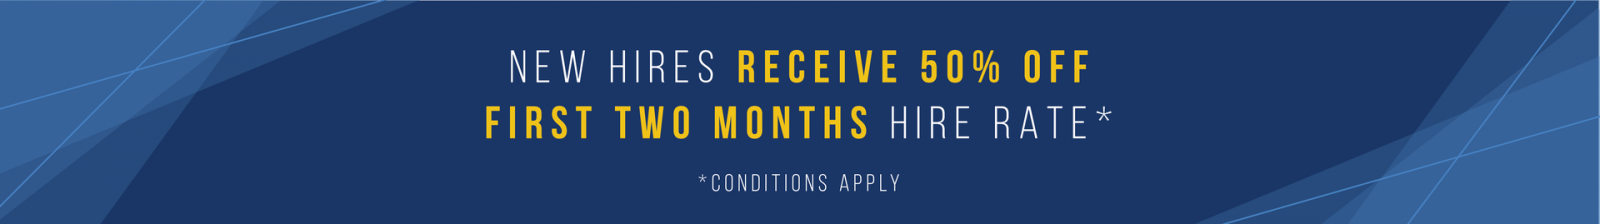 New hires receive 50% off first two months hire rate. Conditions Apply.